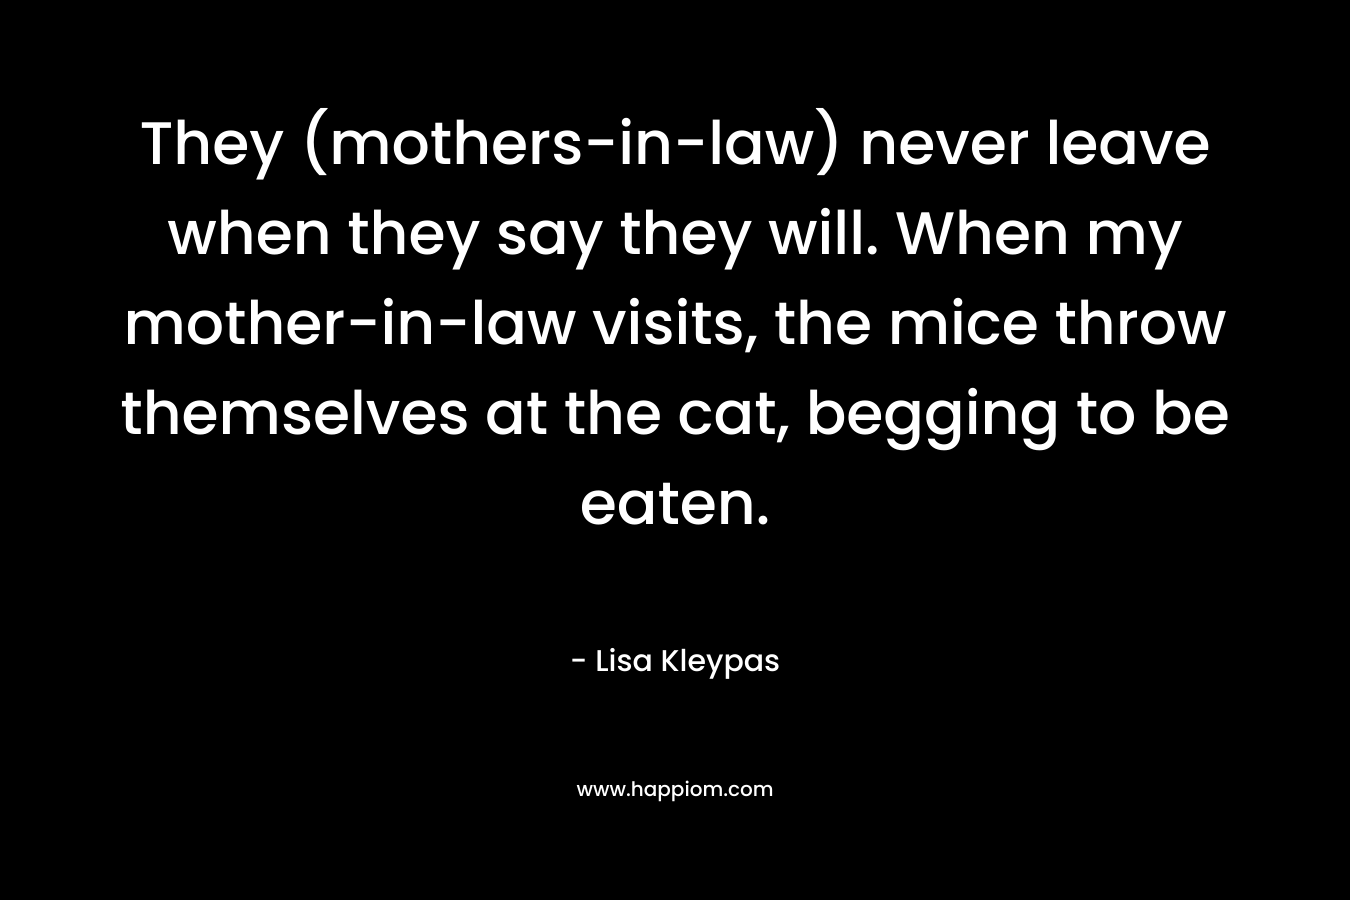 They (mothers-in-law) never leave when they say they will. When my mother-in-law visits, the mice throw themselves at the cat, begging to be eaten.